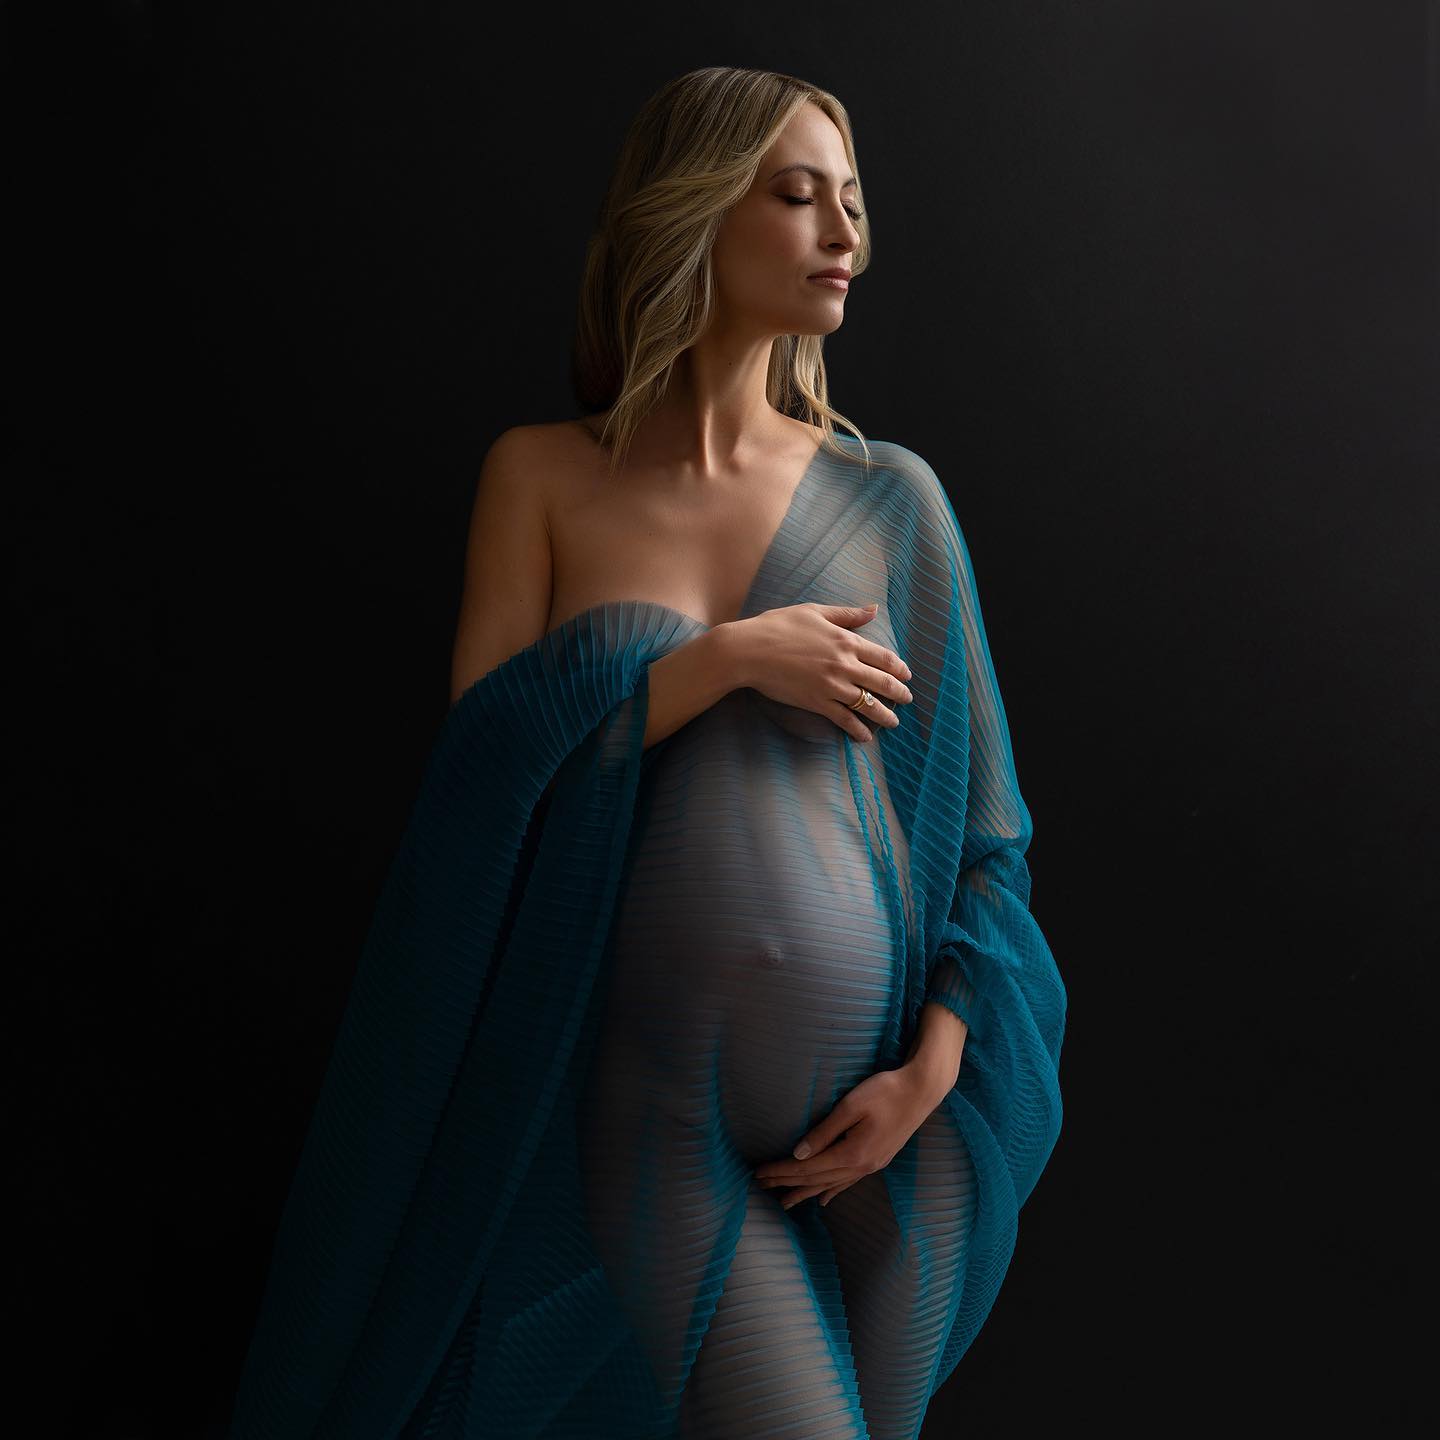 Pregnant woman posing in black background. 